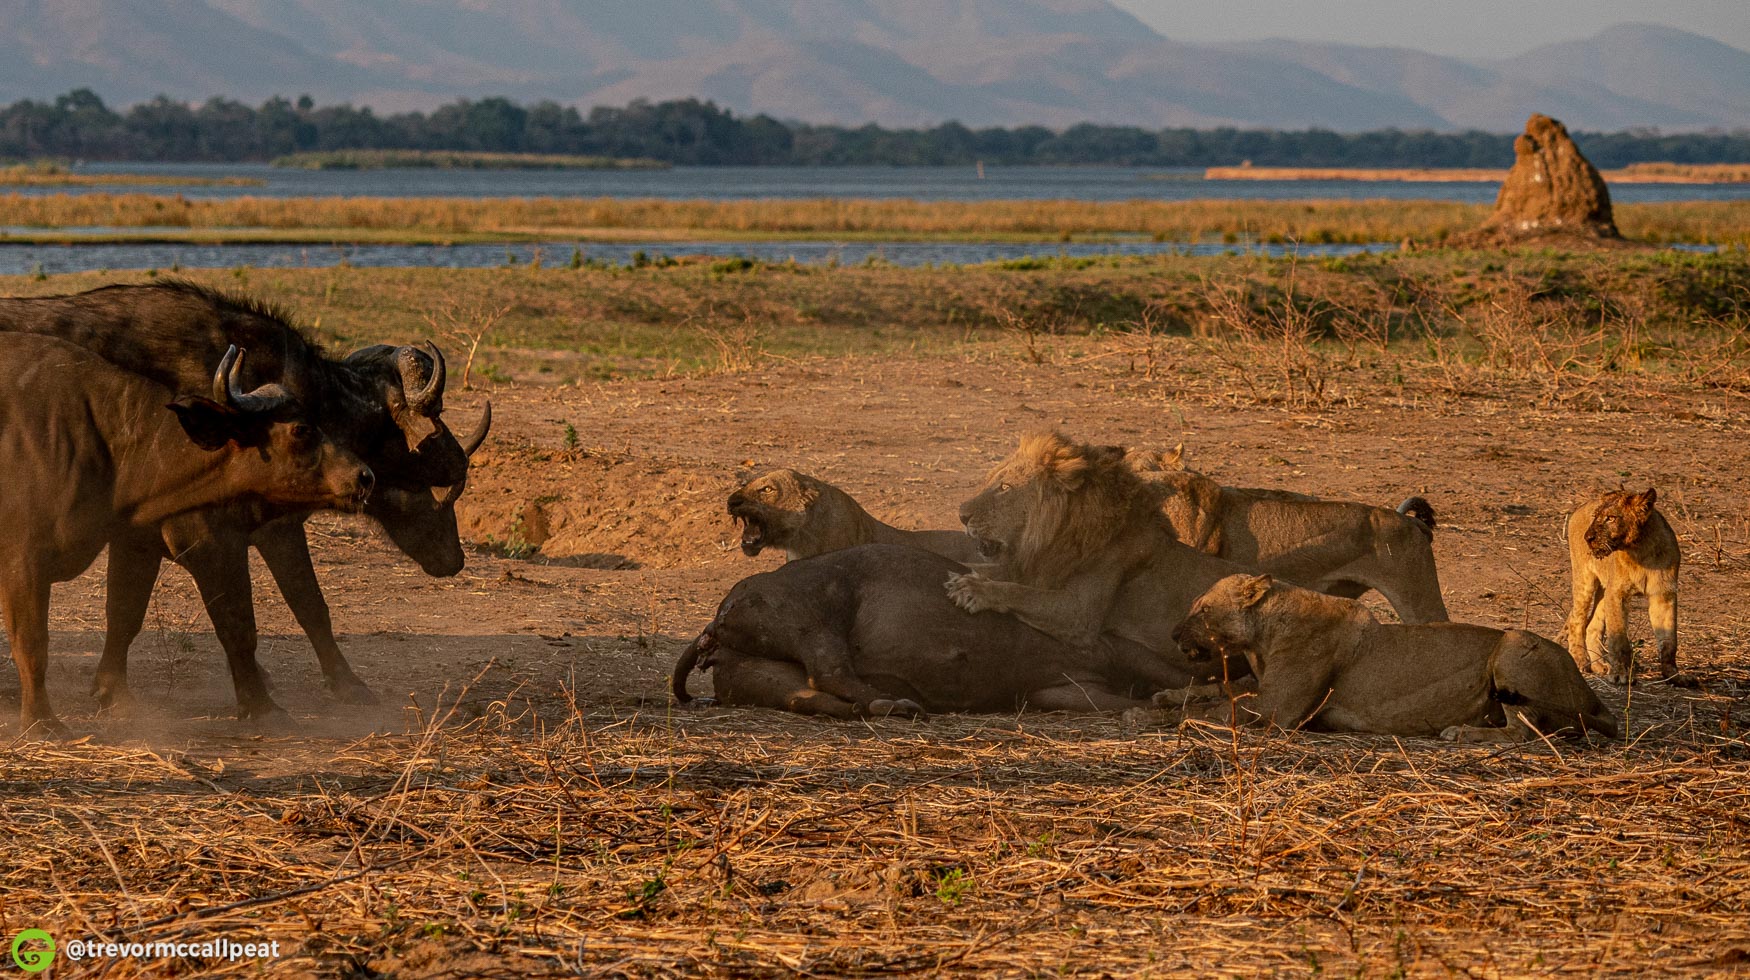 On foot with Lions on a buffalo kill